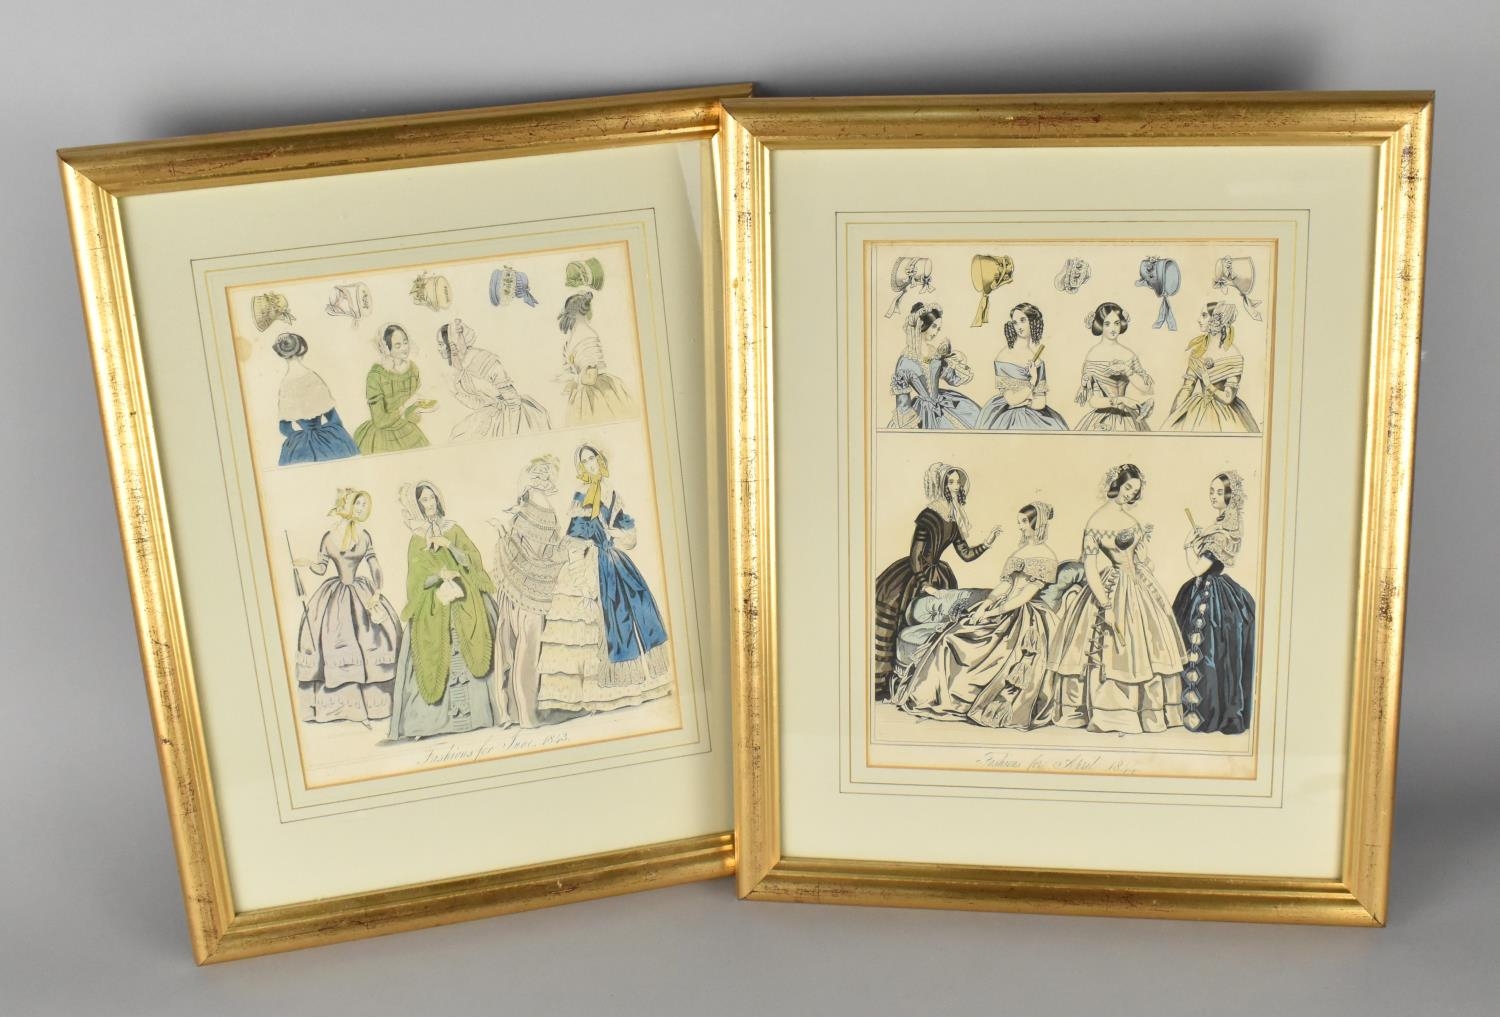 A Pair of Gilt Framed Hand Coloured Engravings for Fashions in 1842 and 1843